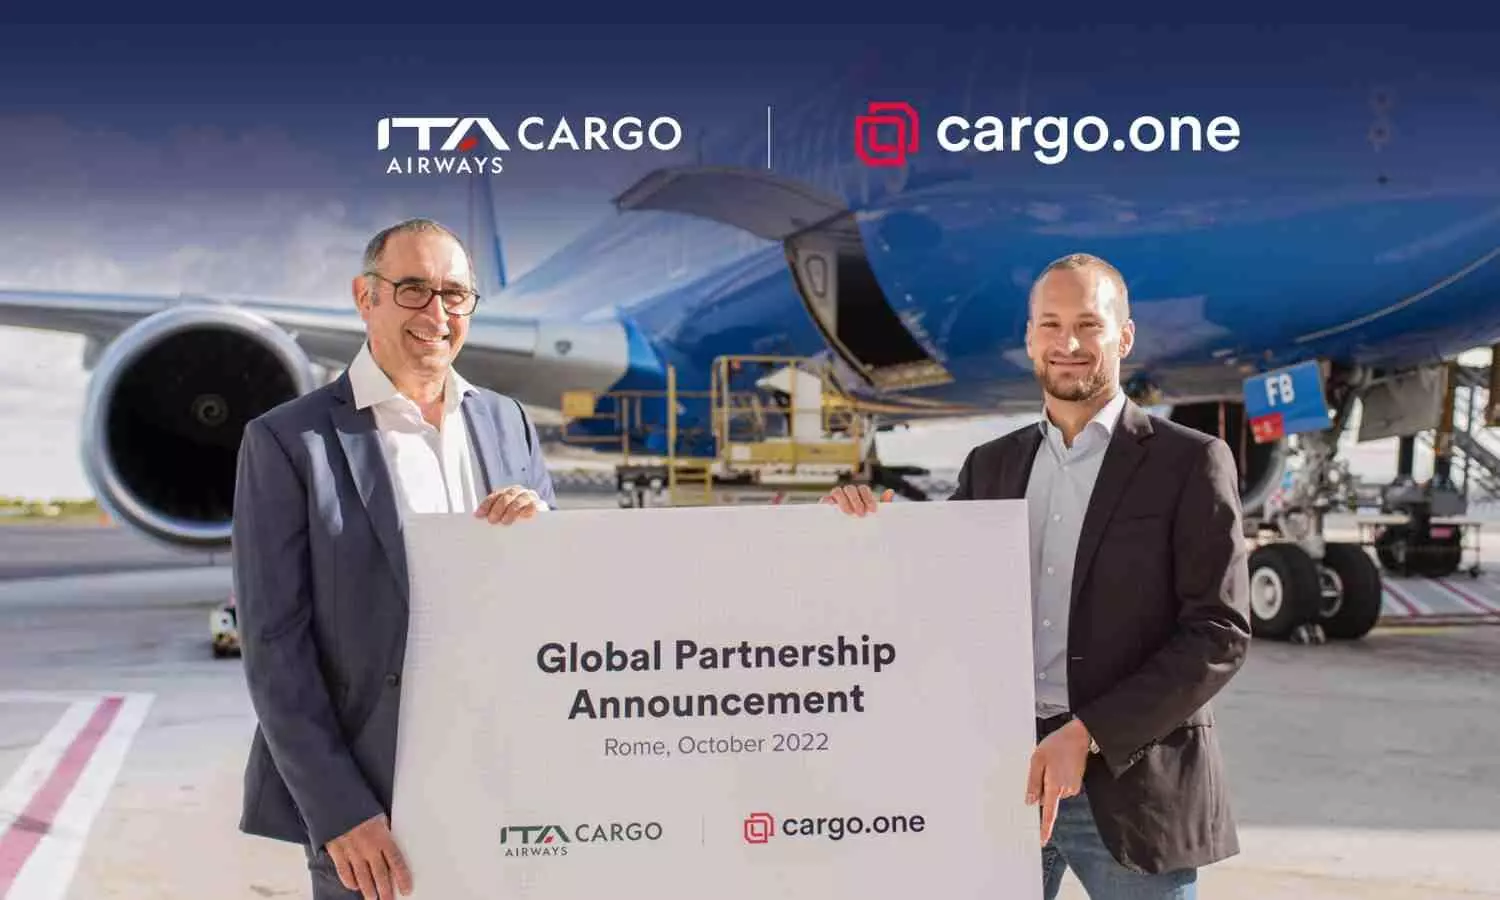 ITA Airways Cargo collaborates with cargo. one to launch its digital sales channel